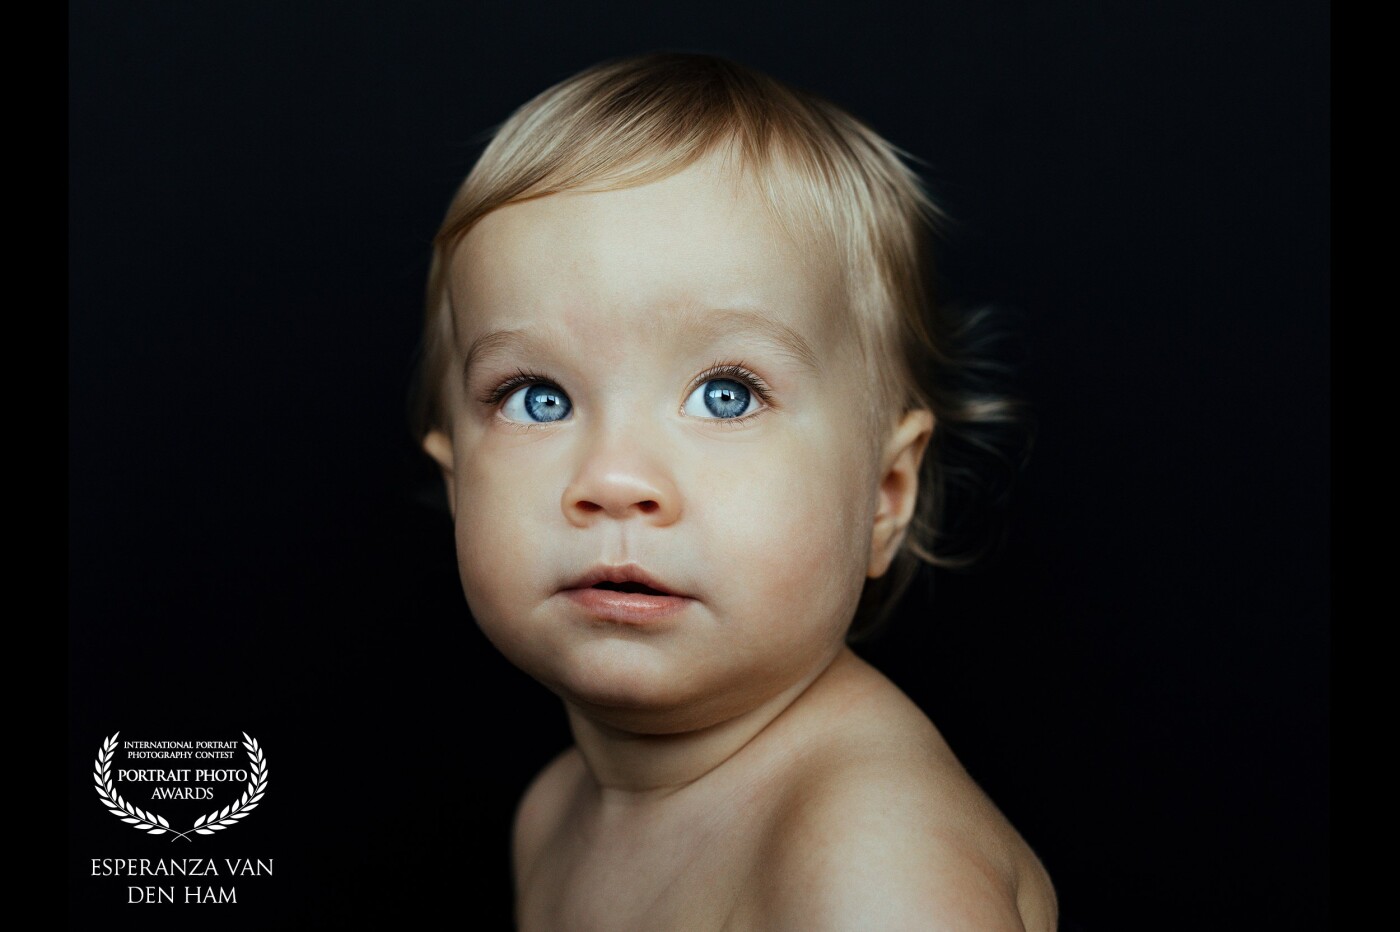 This baby came to my studio and  her eyes where zo bright. Normaly my models are wearing a black shirt. But this time i tried without to see more skincolor en it makes the photo so pure. <br />
<br />
Created by: @iamshootingportraits<br />
www.iamshootingportraits.nl